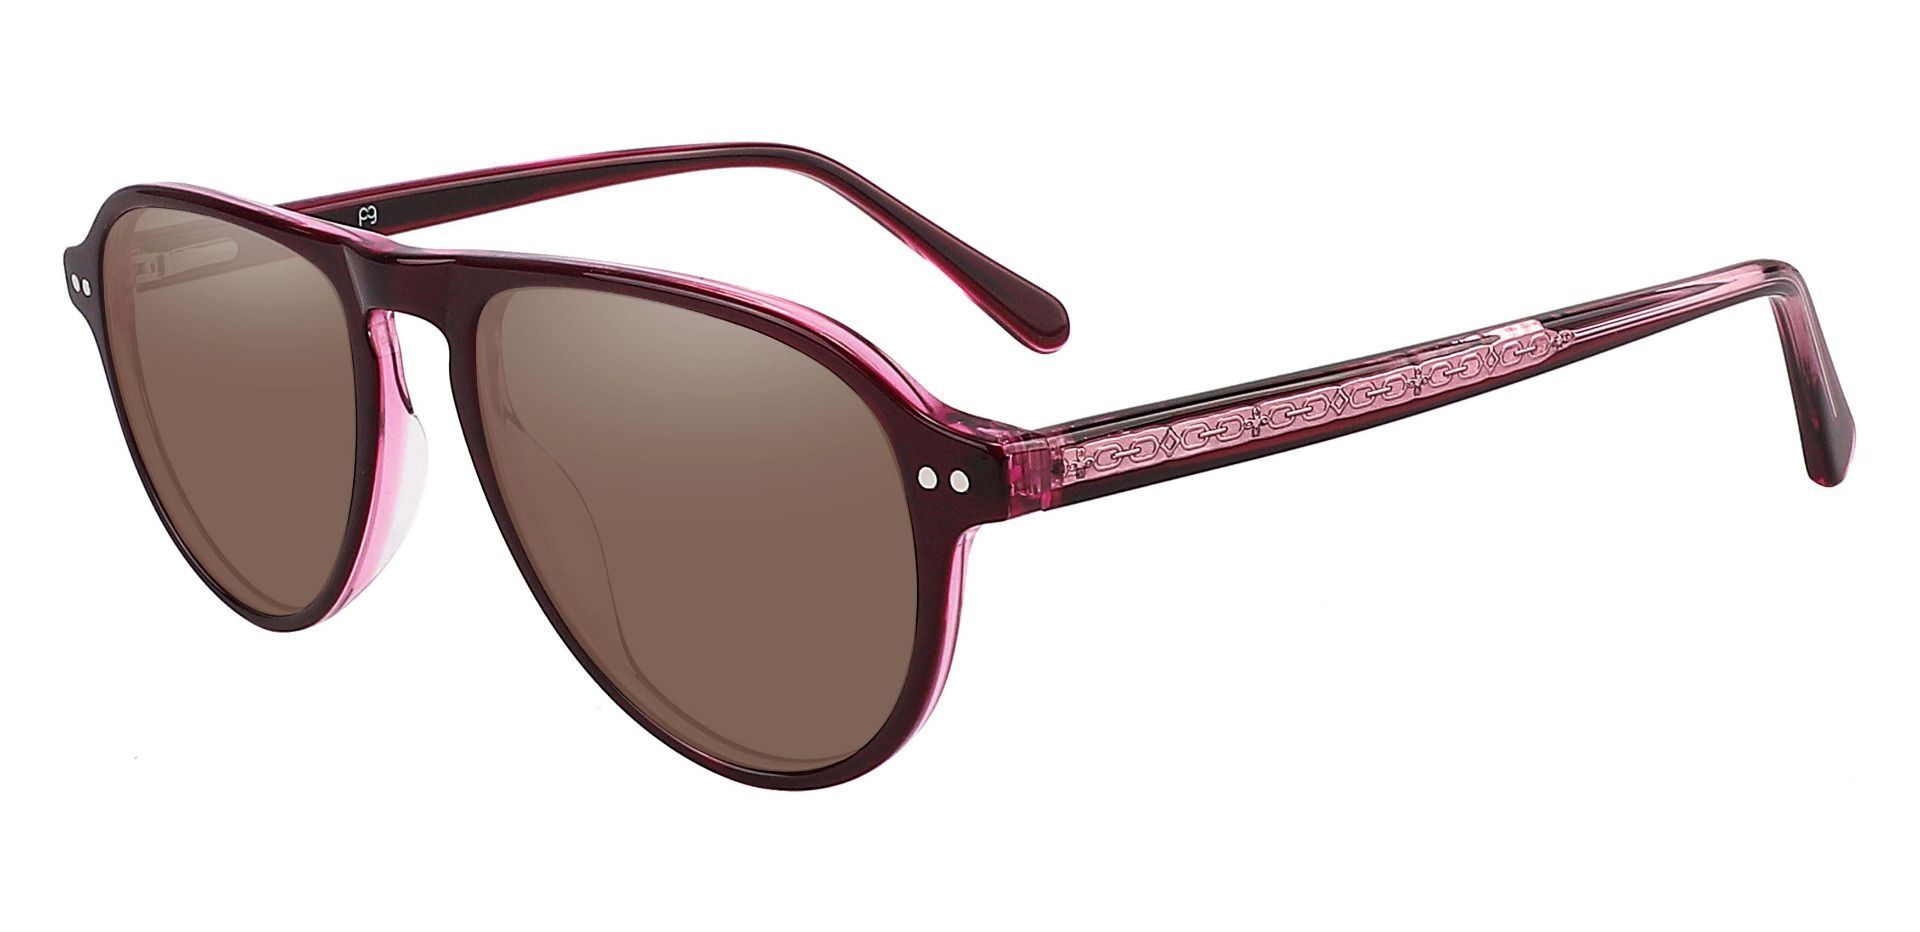 Durham Aviator Lined Bifocal Sunglasses - Purple Frame With Brown Lenses